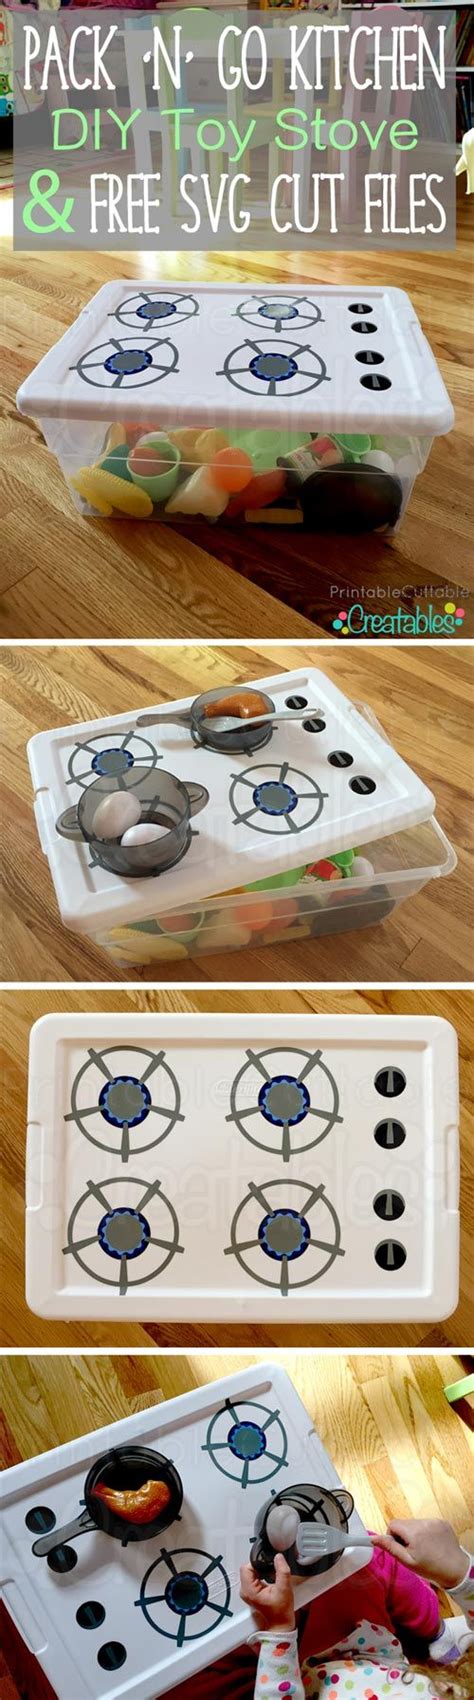 Pack N Go Kitchen Diy Toy Stove Made With Silhouette Cameo